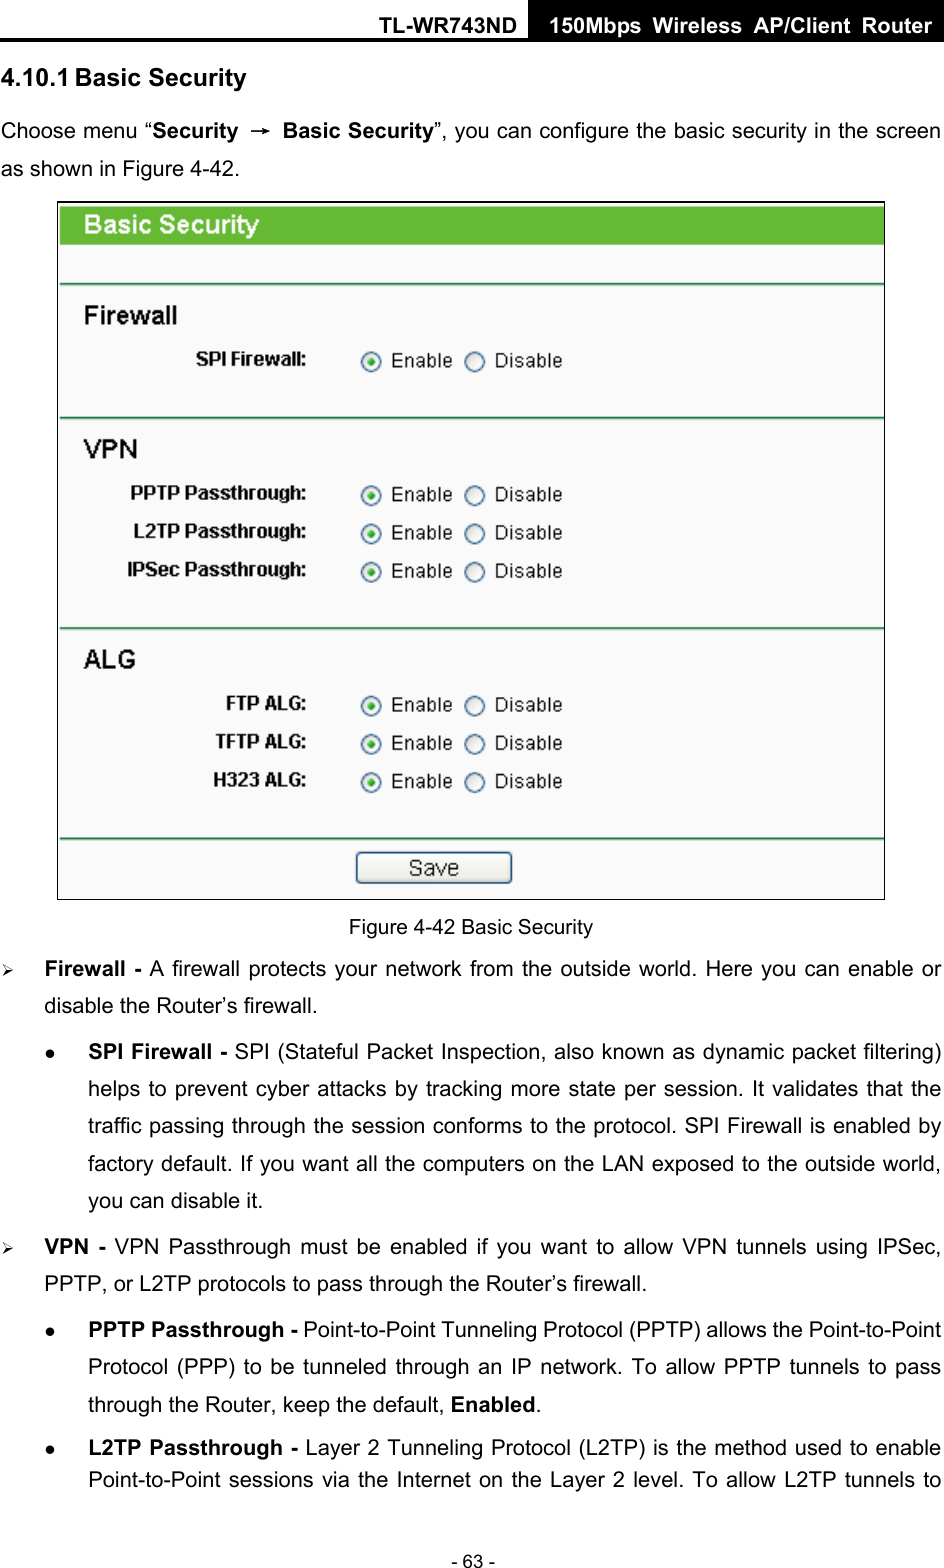 TL-WR743ND 150Mbps Wireless AP/Client Router - 63 - 4.10.1 Basic Security Choose menu “Security  → Basic Security”, you can configure the basic security in the screen as shown in Figure 4-42.  Figure 4-42 Basic Security ¾ Firewall - A firewall protects your network from the outside world. Here you can enable or disable the Router’s firewall. z SPI Firewall - SPI (Stateful Packet Inspection, also known as dynamic packet filtering) helps to prevent cyber attacks by tracking more state per session. It validates that the traffic passing through the session conforms to the protocol. SPI Firewall is enabled by factory default. If you want all the computers on the LAN exposed to the outside world, you can disable it.   ¾ VPN - VPN Passthrough must be enabled if you want to allow VPN tunnels using IPSec, PPTP, or L2TP protocols to pass through the Router’s firewall. z PPTP Passthrough - Point-to-Point Tunneling Protocol (PPTP) allows the Point-to-Point Protocol (PPP) to be tunneled through an IP network. To allow PPTP tunnels to pass through the Router, keep the default, Enabled.  z L2TP Passthrough - Layer 2 Tunneling Protocol (L2TP) is the method used to enable Point-to-Point sessions via the Internet on the Layer 2 level. To allow L2TP tunnels to 